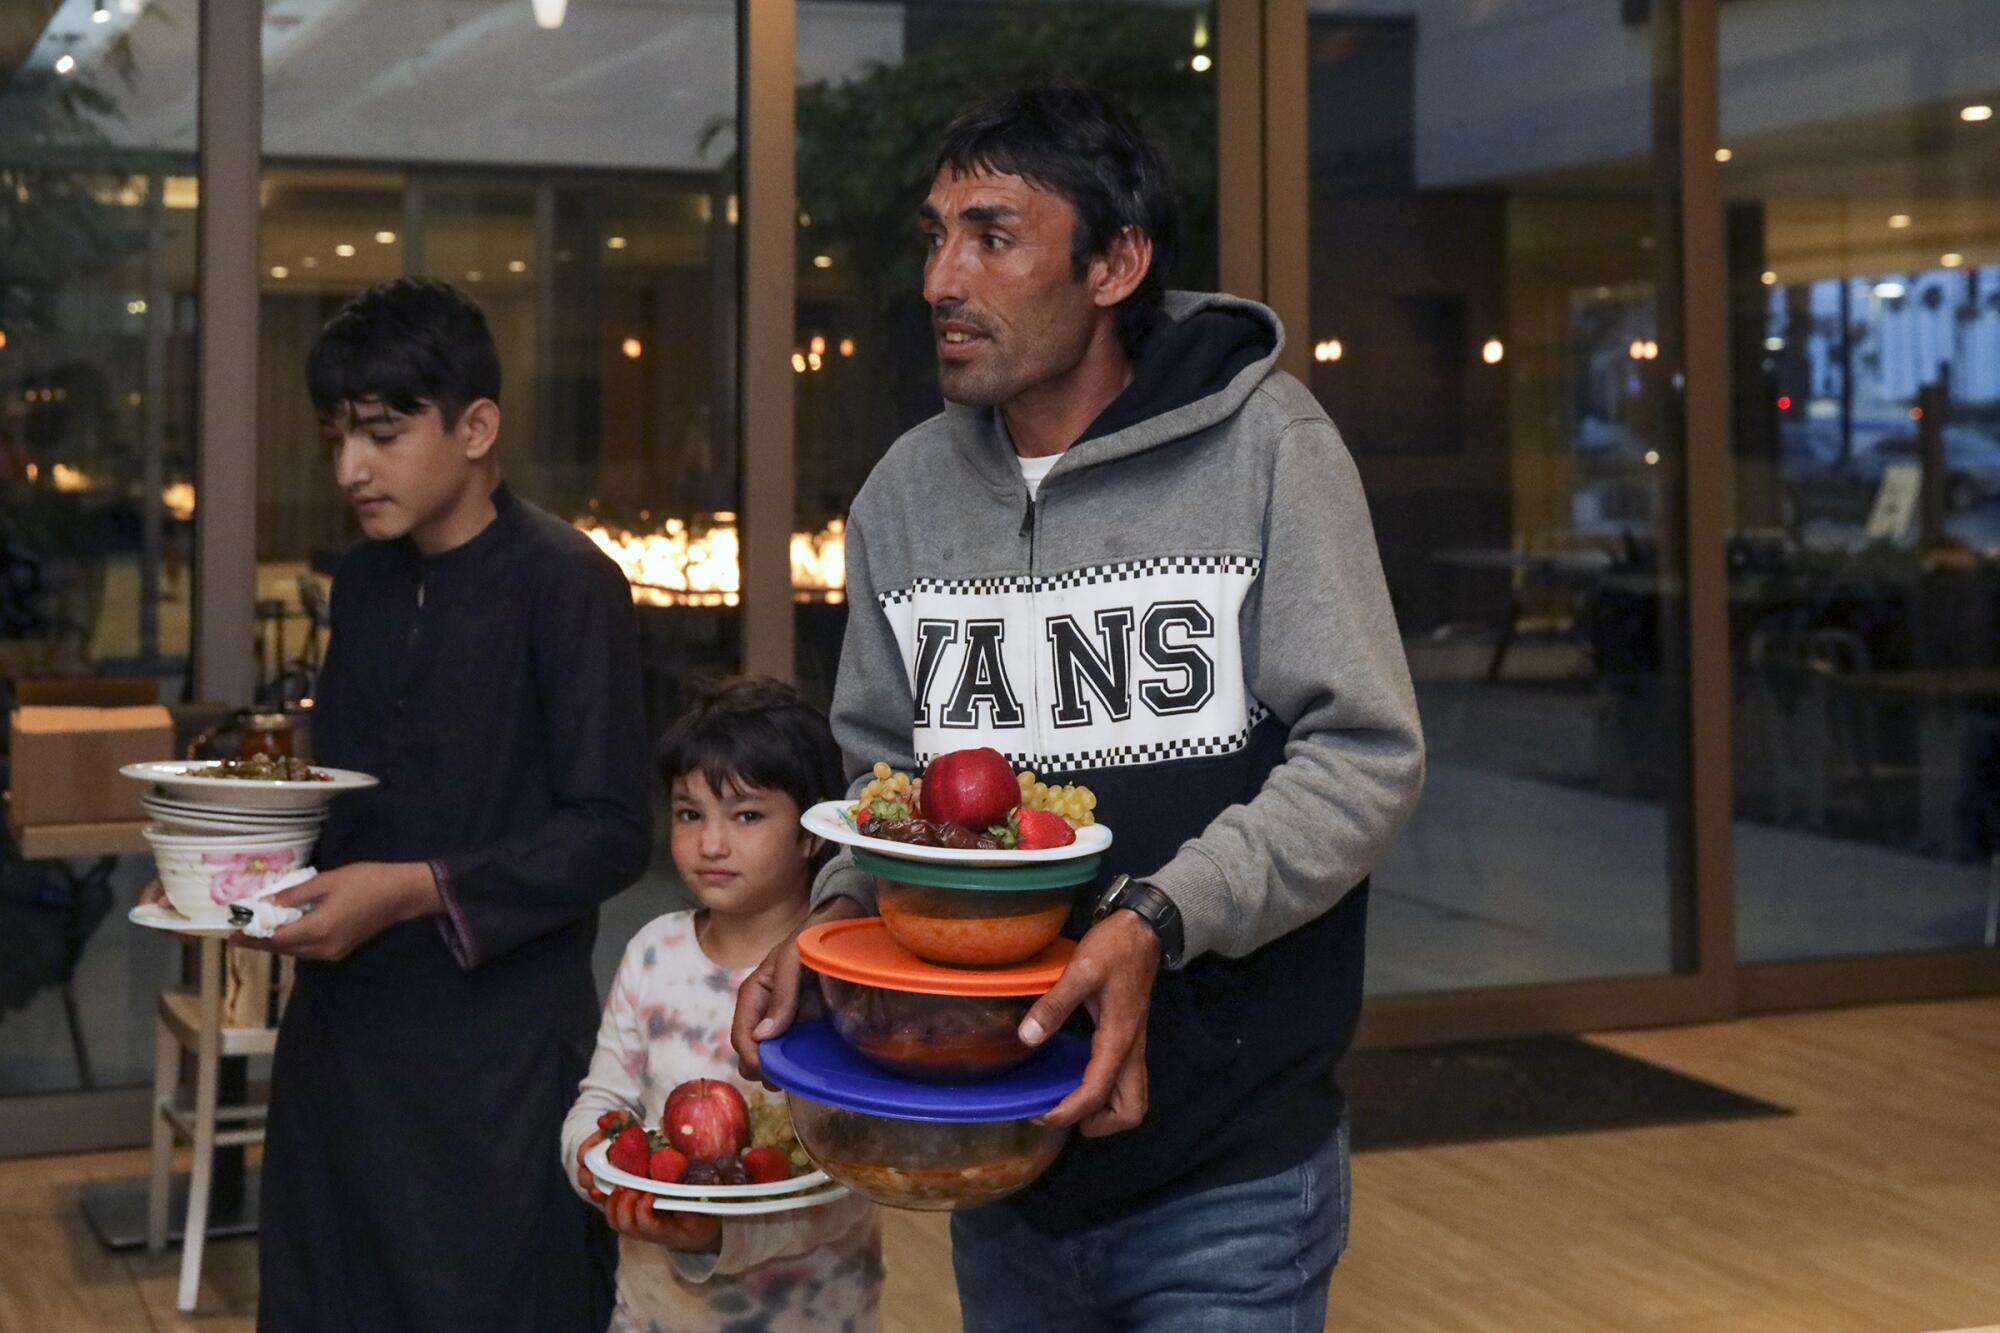 A man and two children hold plates and containers of food.